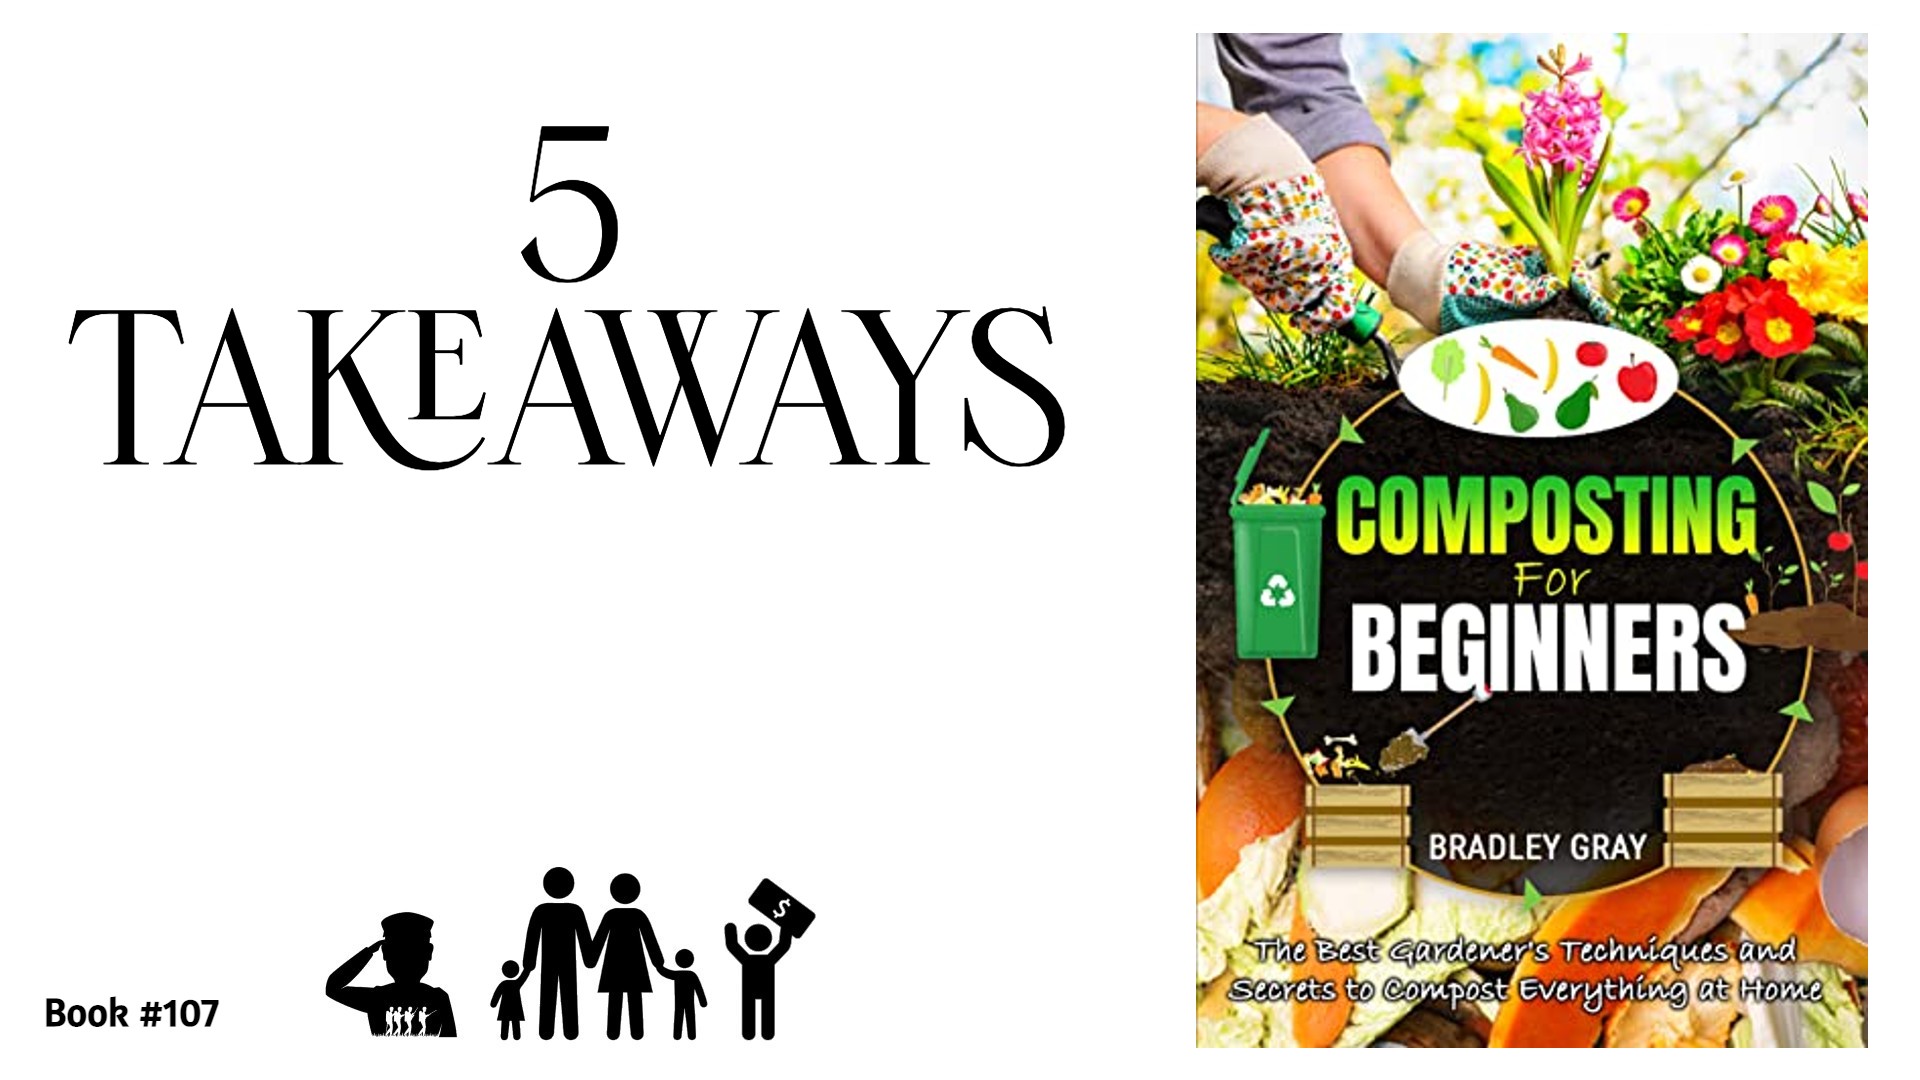 5 Takeaways from “Composting for Beginners”